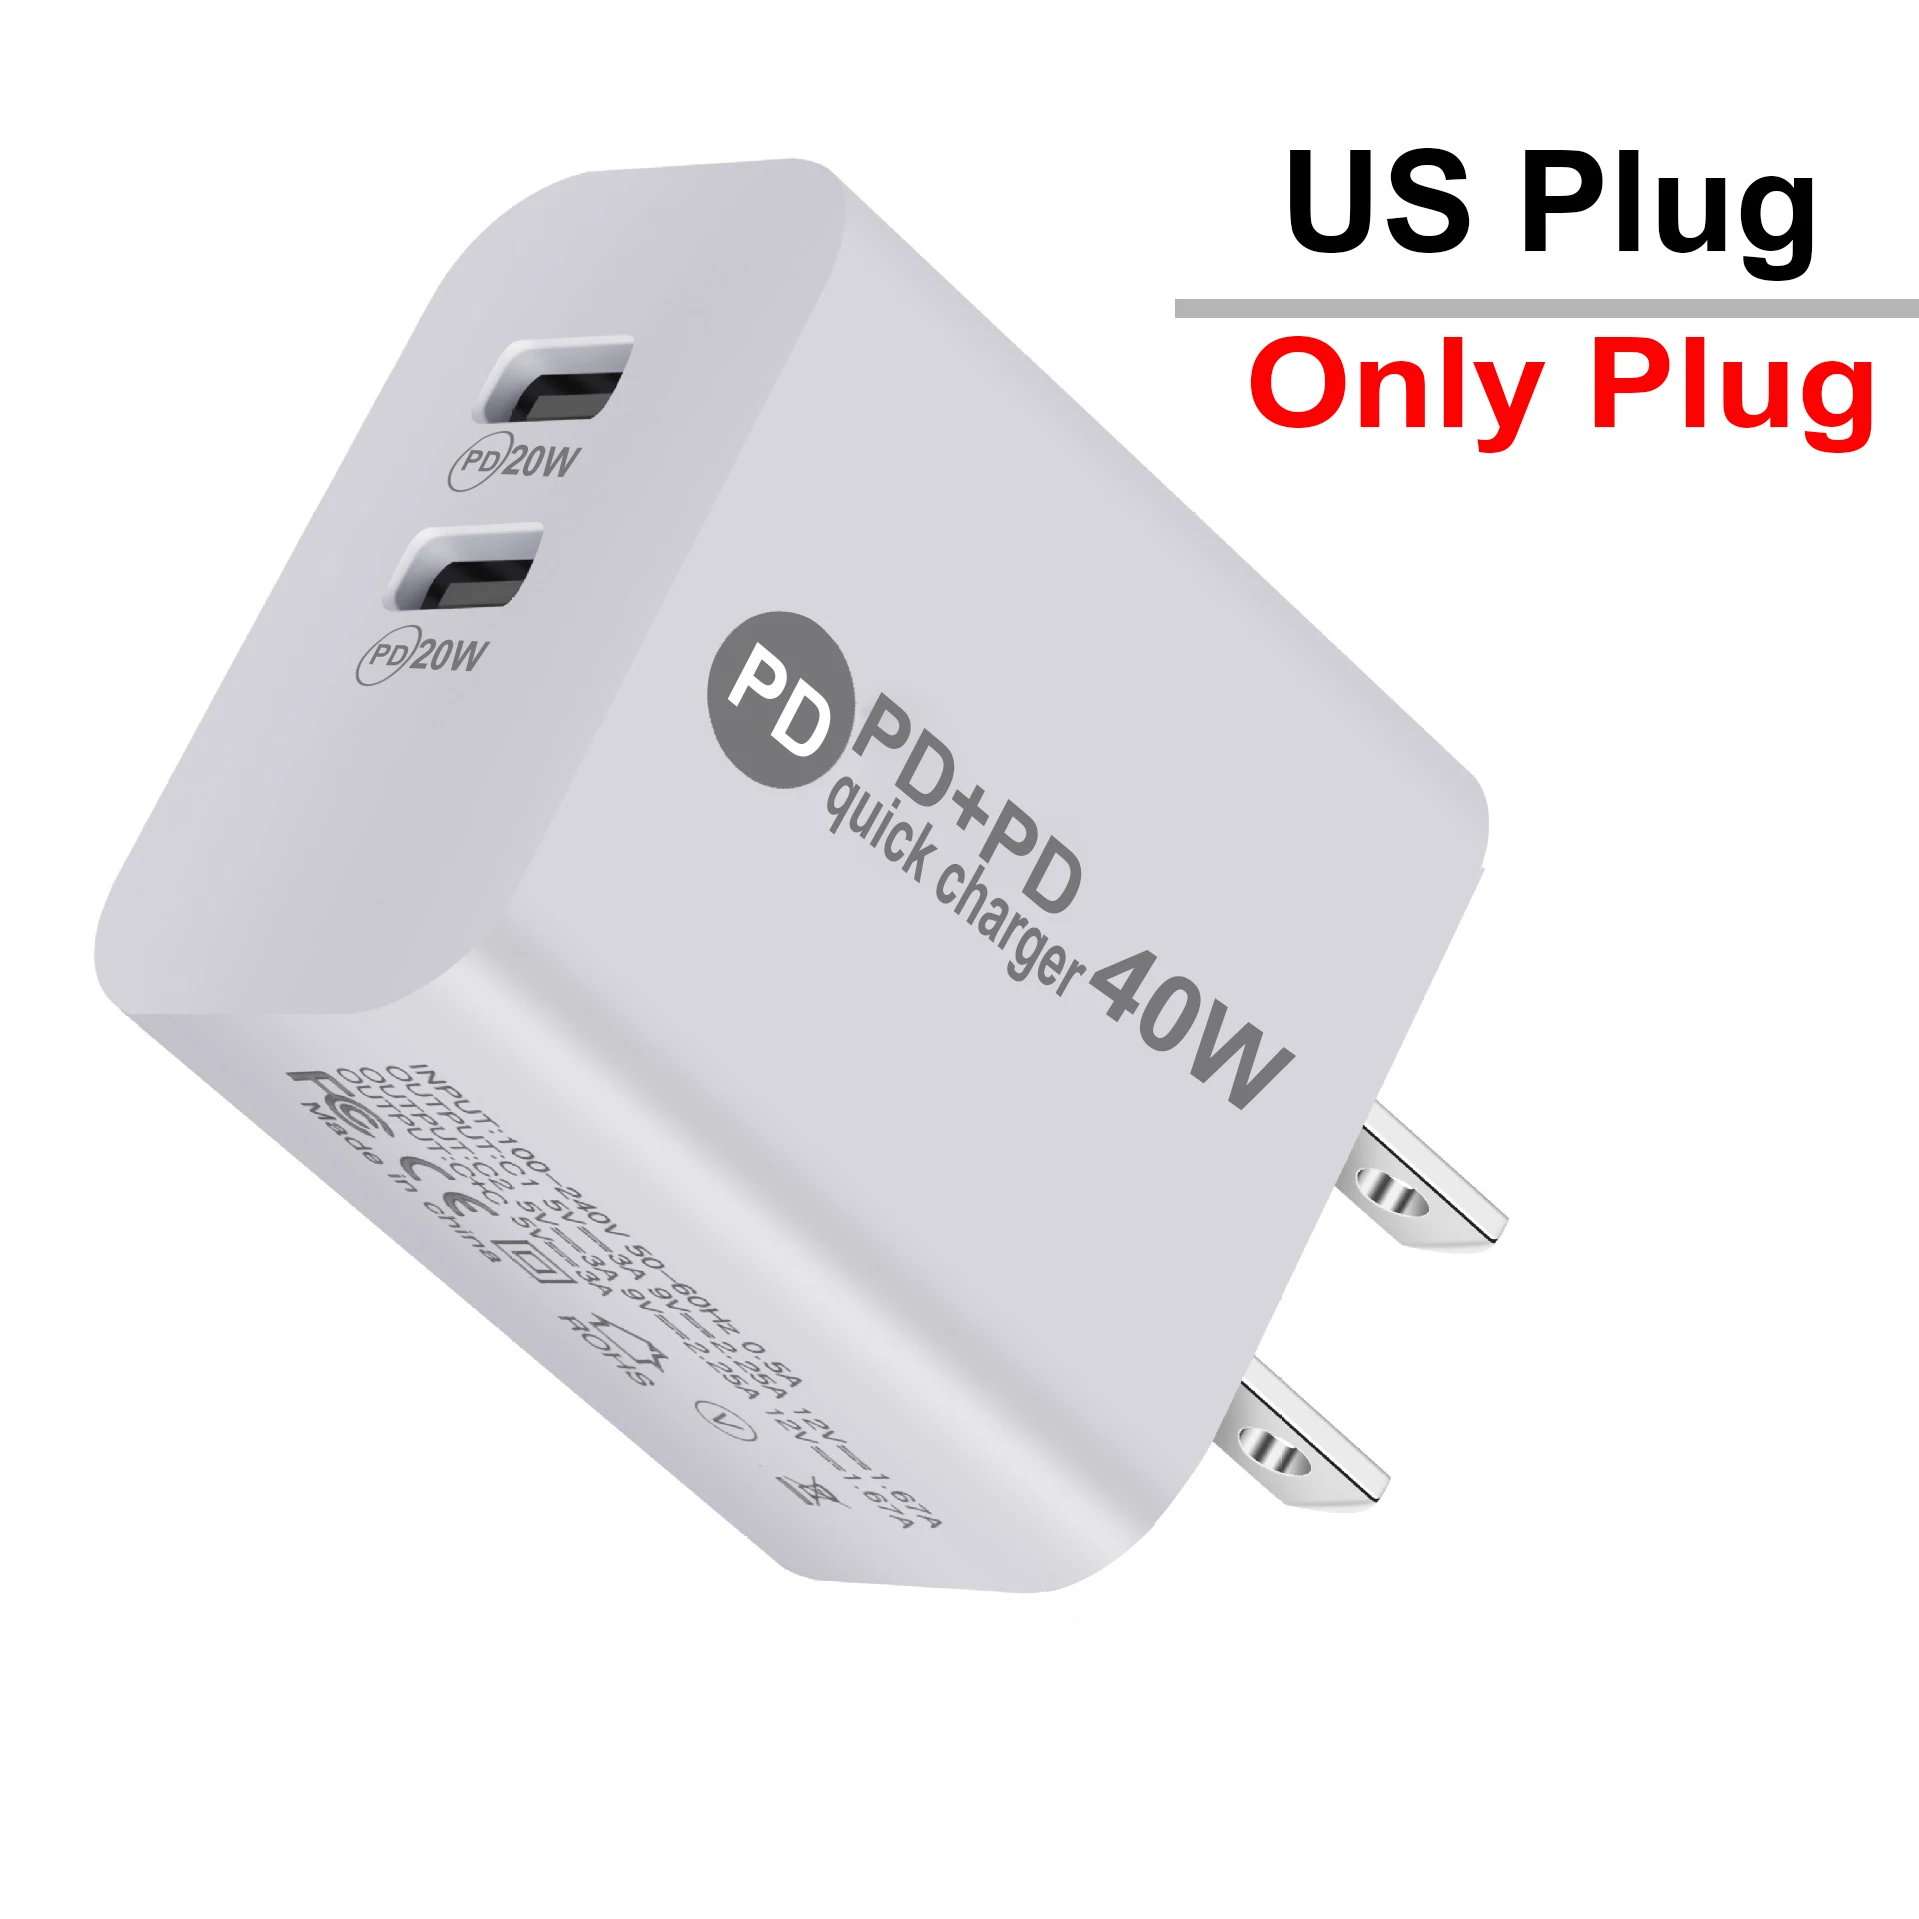 usb quick charge 3.0 Dual USB-C Charger PD 20W QC 3.0 Fast Charging Type C Mobile Phone Portable Adapter For iPhone 12 11 Pro 8 Huawei Xiaomi Samsung 65 w charger Chargers